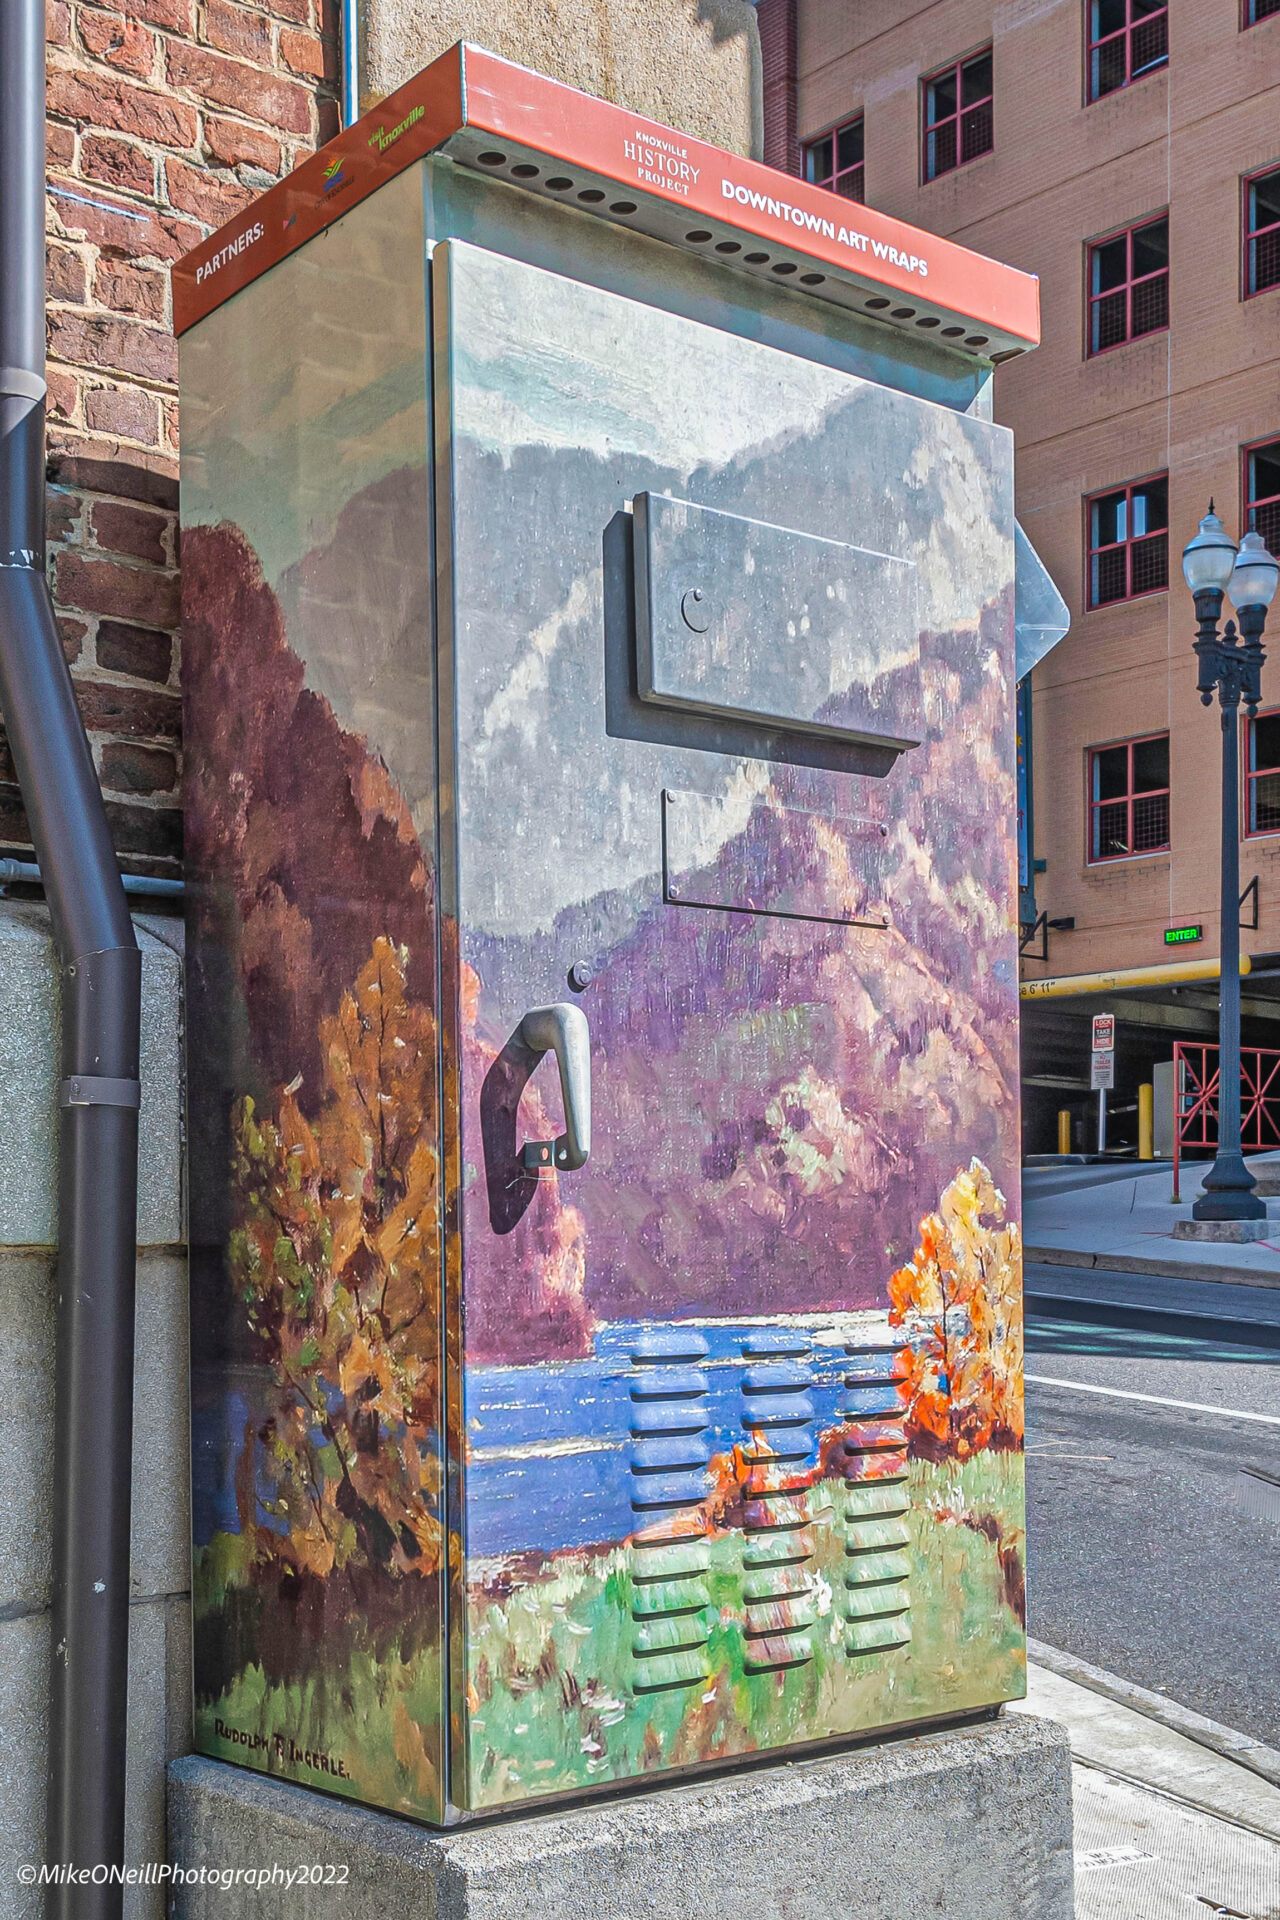 Smoky Mountains by Rudolph Ingerle at W. Church Avenue at Locust Street. Photography by Mike O'Neill. Sponsorship available.